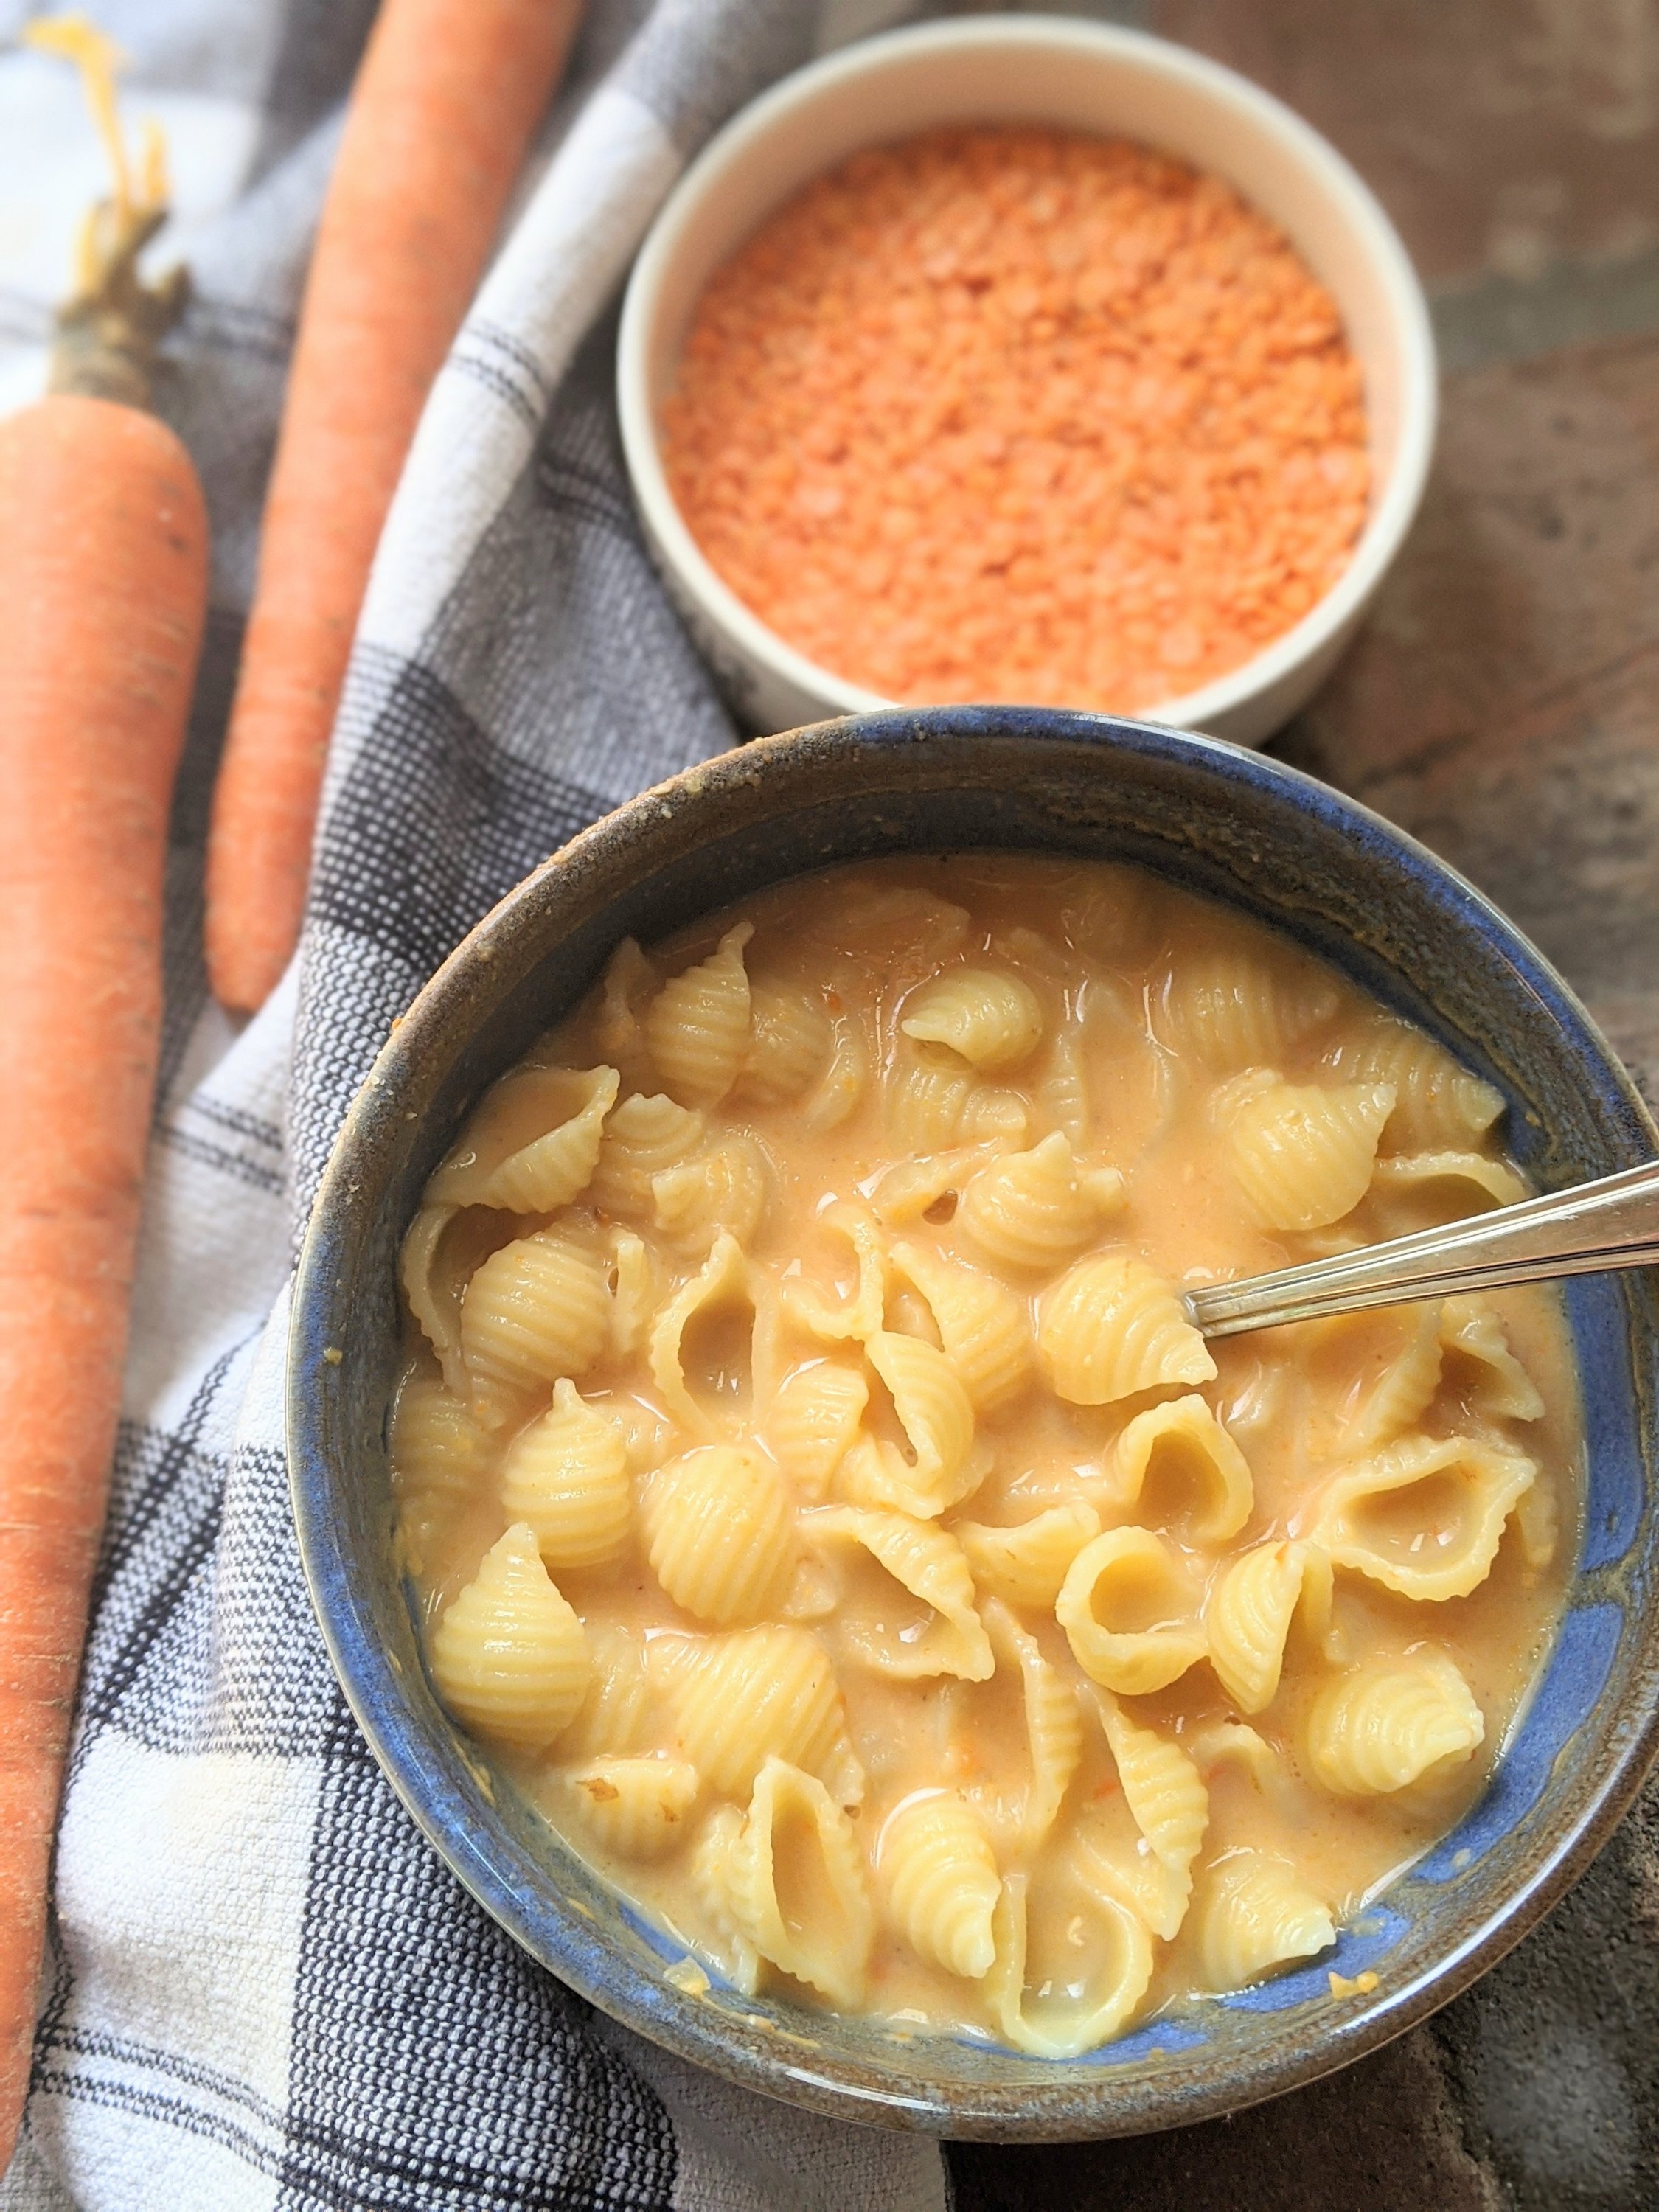 red lentil mac and cheese soup recipe macaroni and cheese recipes for luch or dinner healthy light versions of you facorite comfort foods can be made vegan gluten free meatless